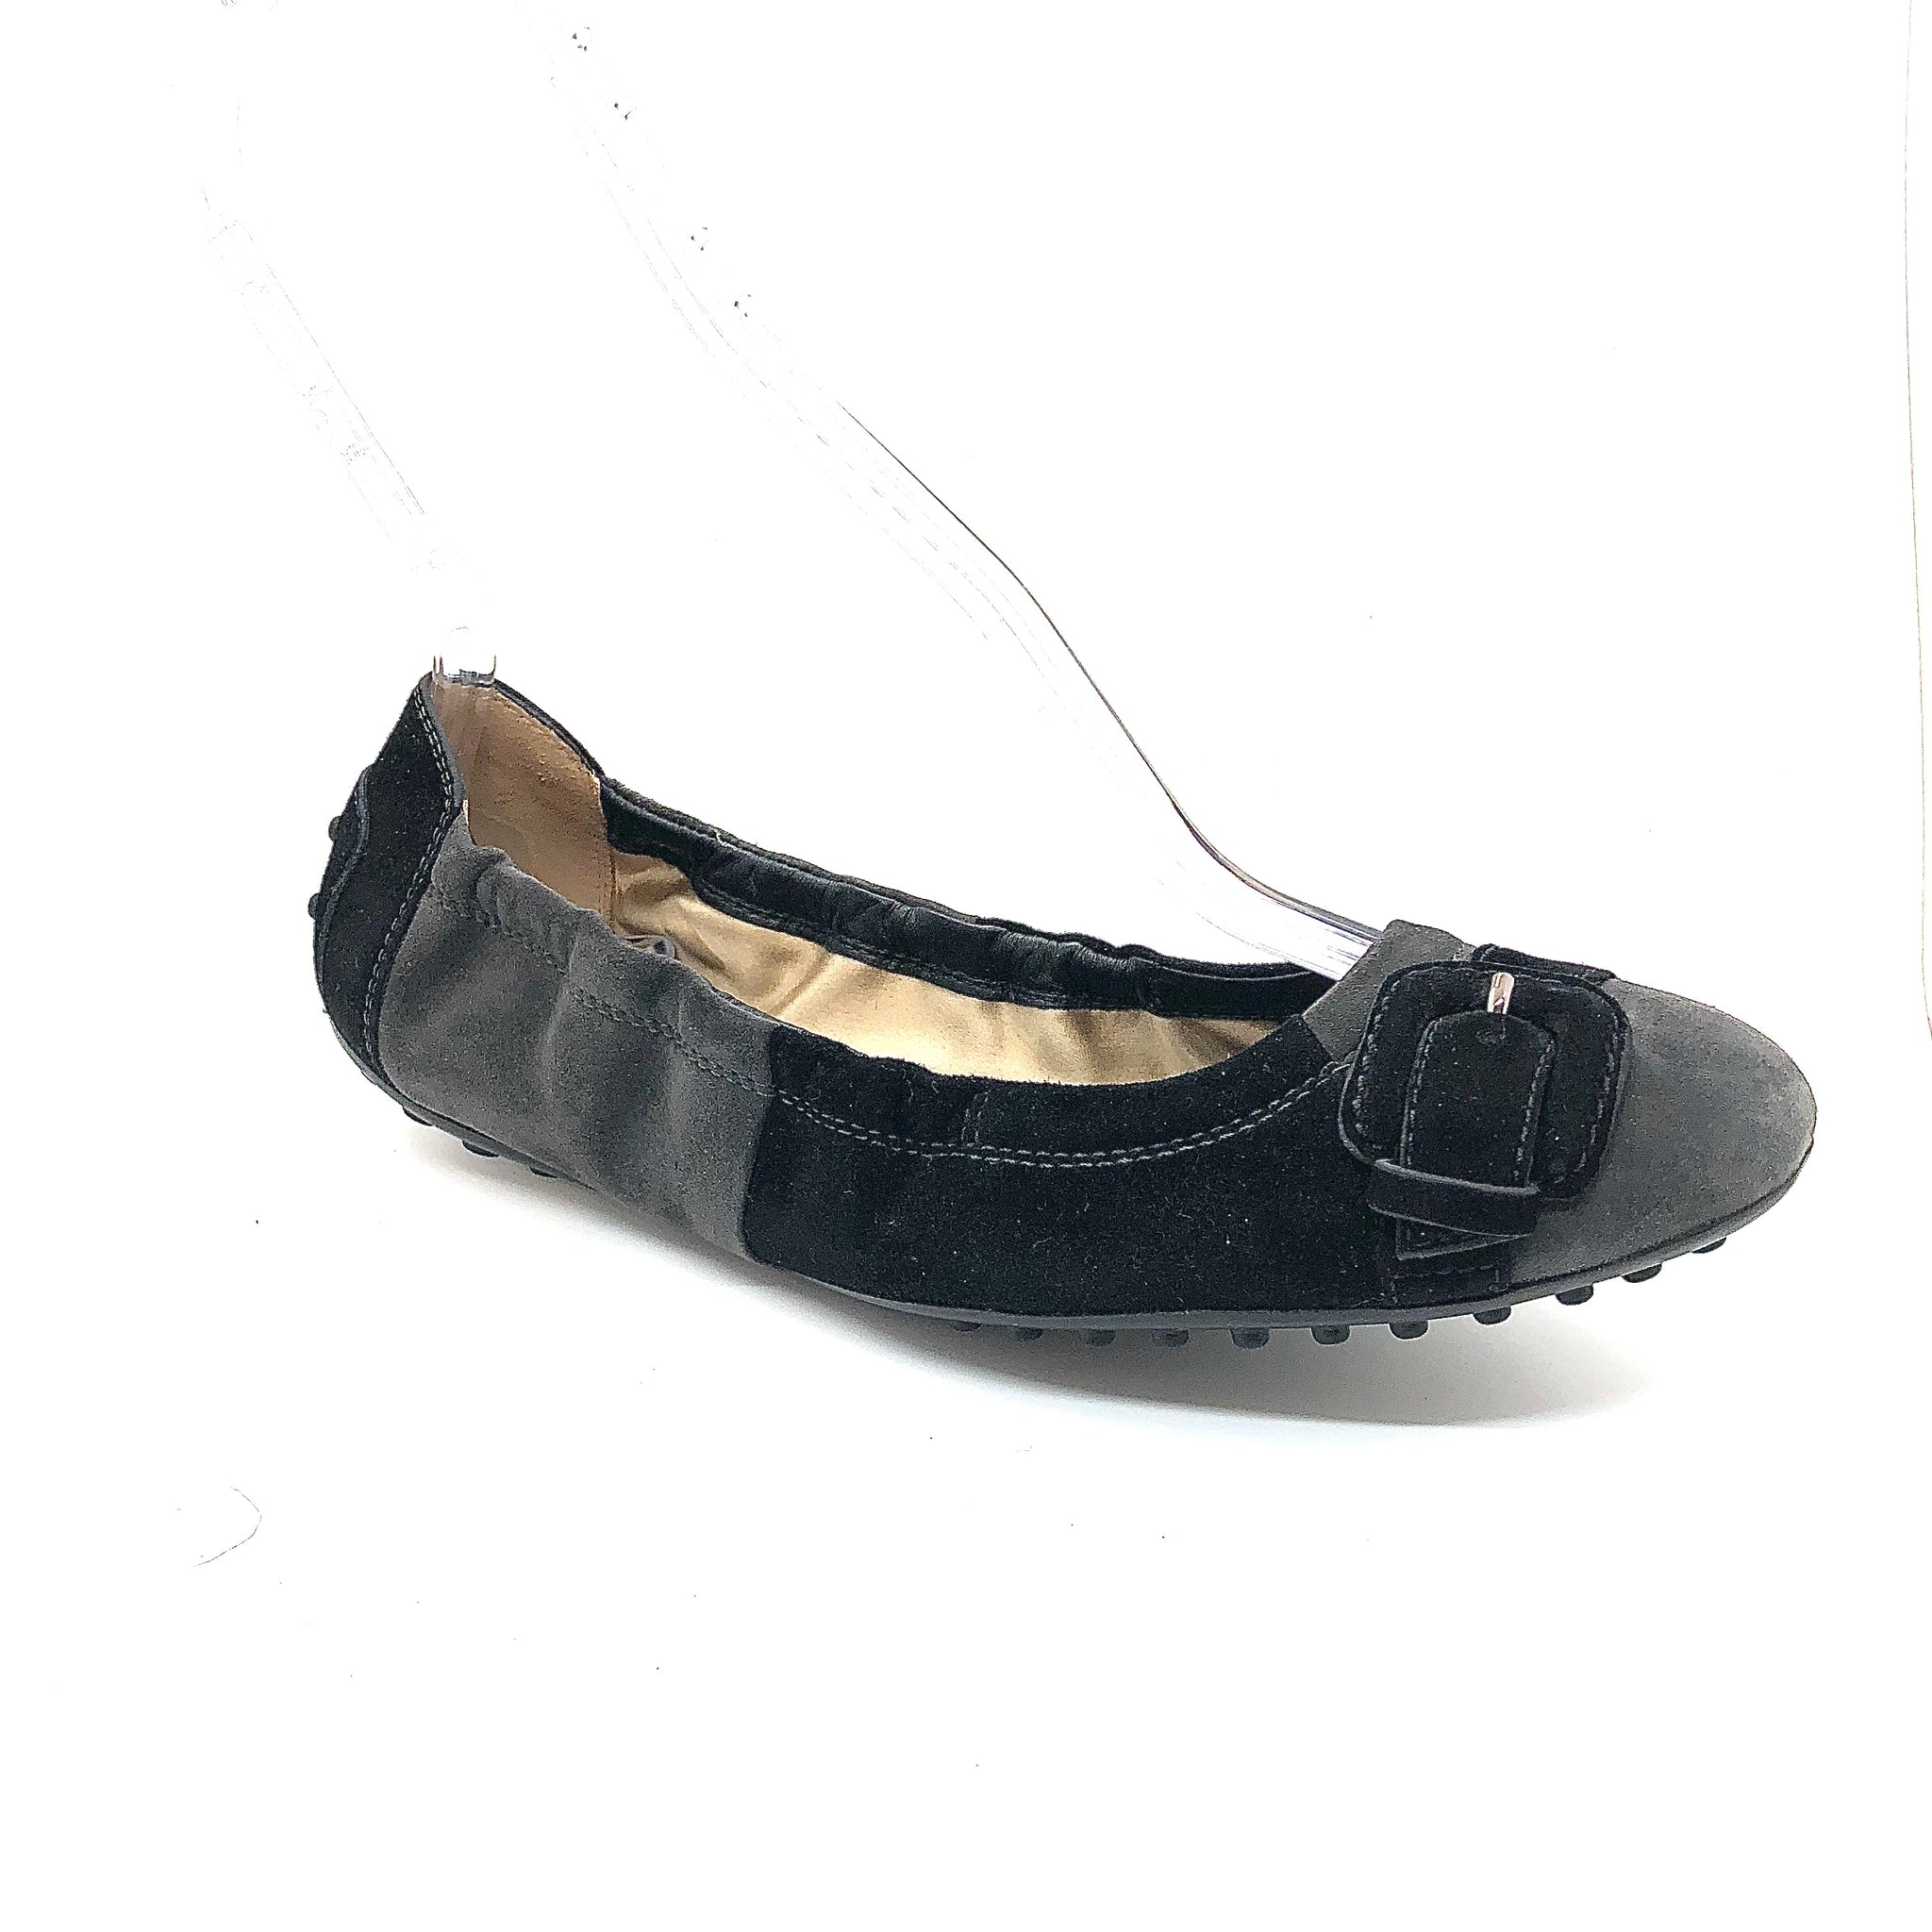 Tods Black Size 38 Women's Shoes